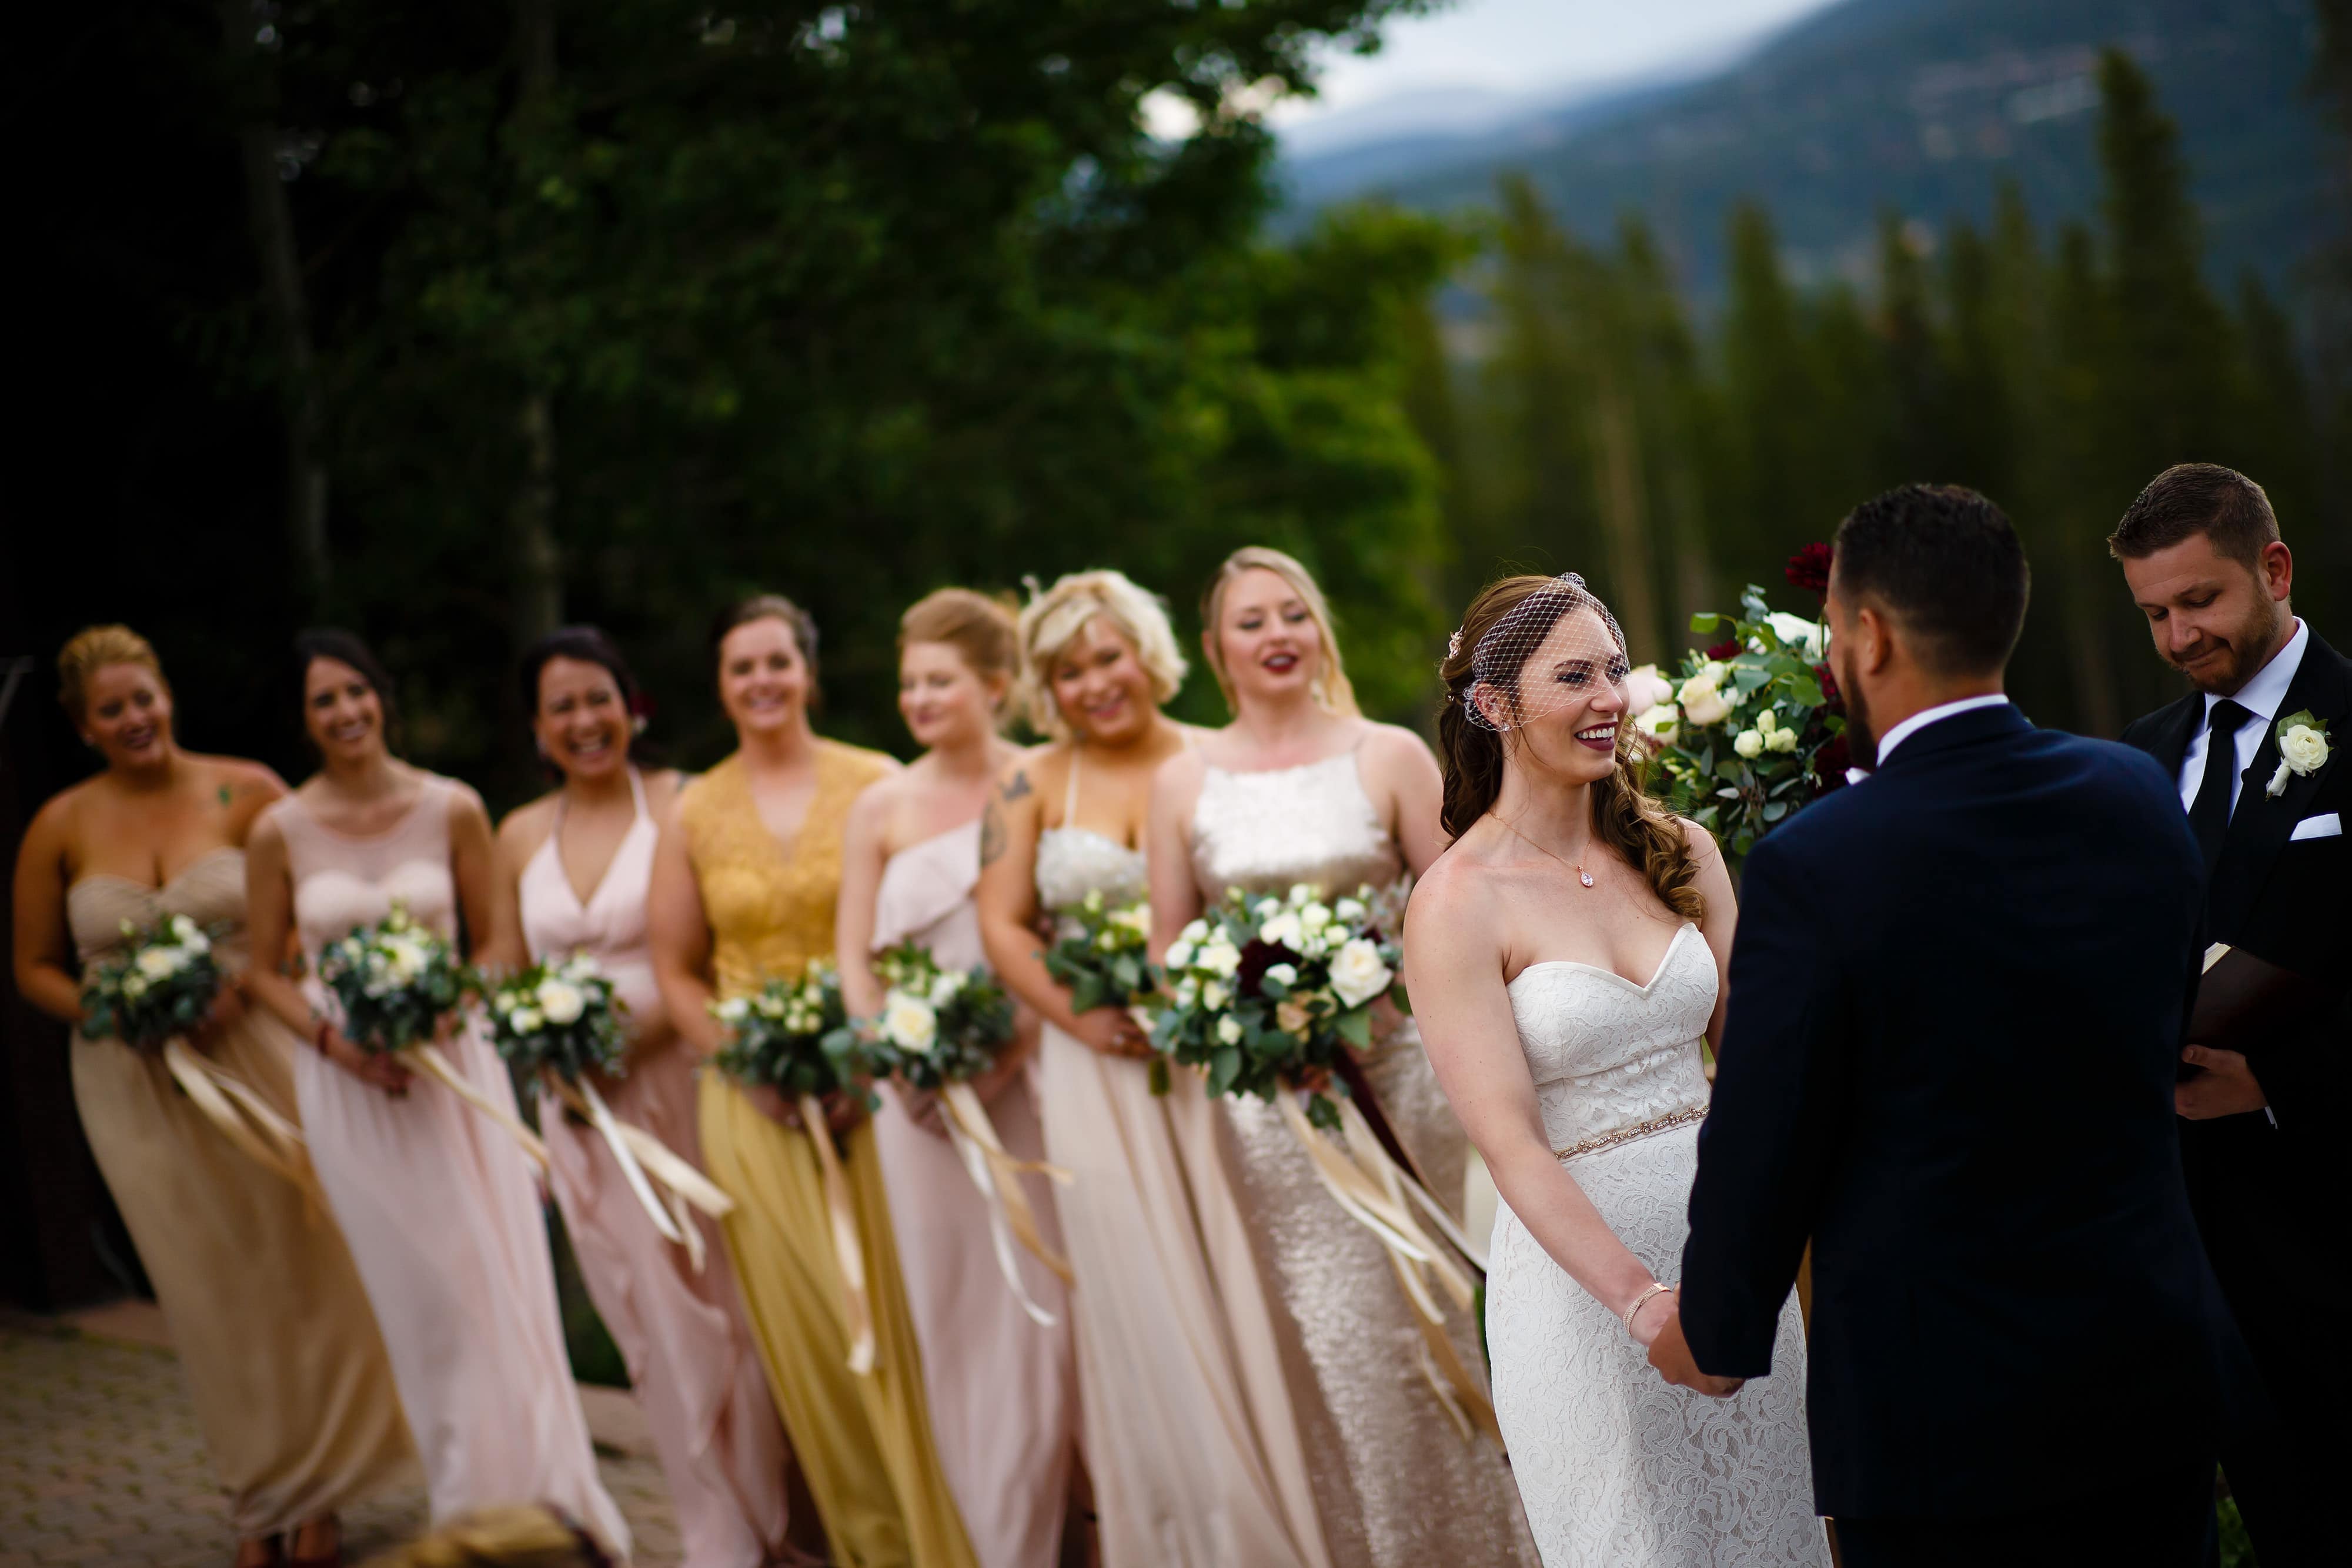 The bridesmaids look on during the ceremony